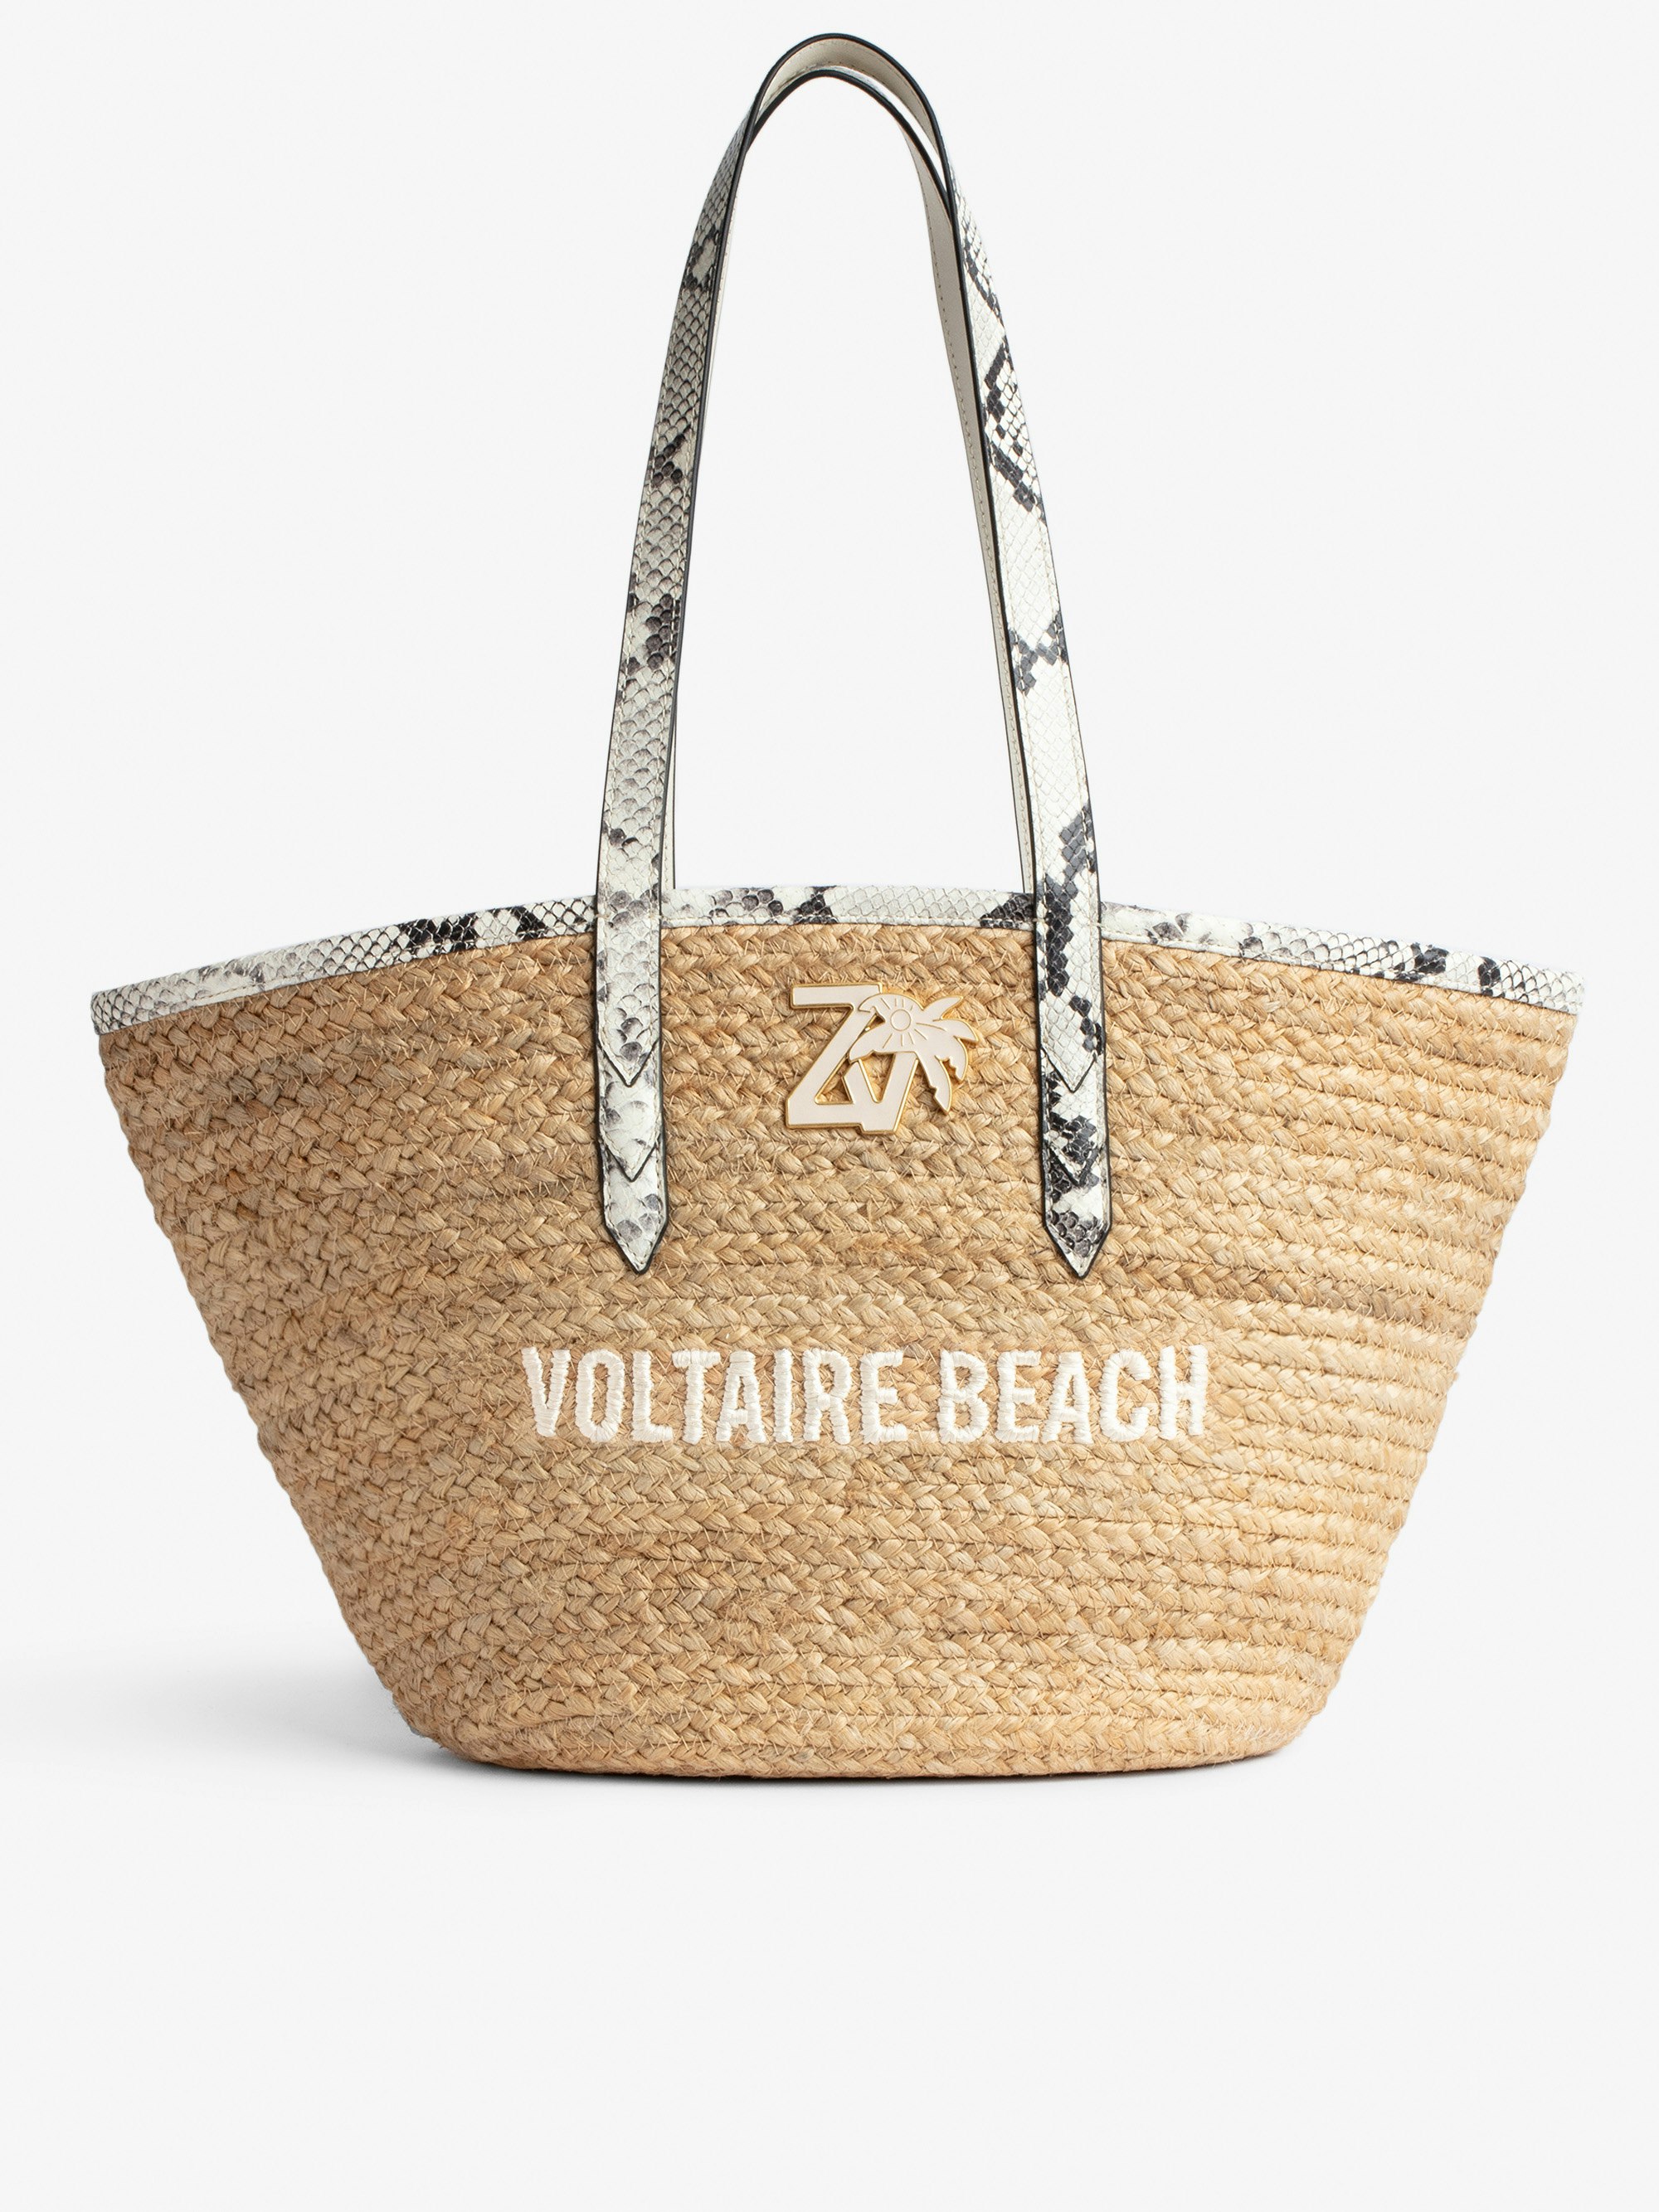 Le Beach Bag - Women's straw bag with off-white snakeskin-effect leather handles, "Voltaire Beach" embroidery and ZV charm